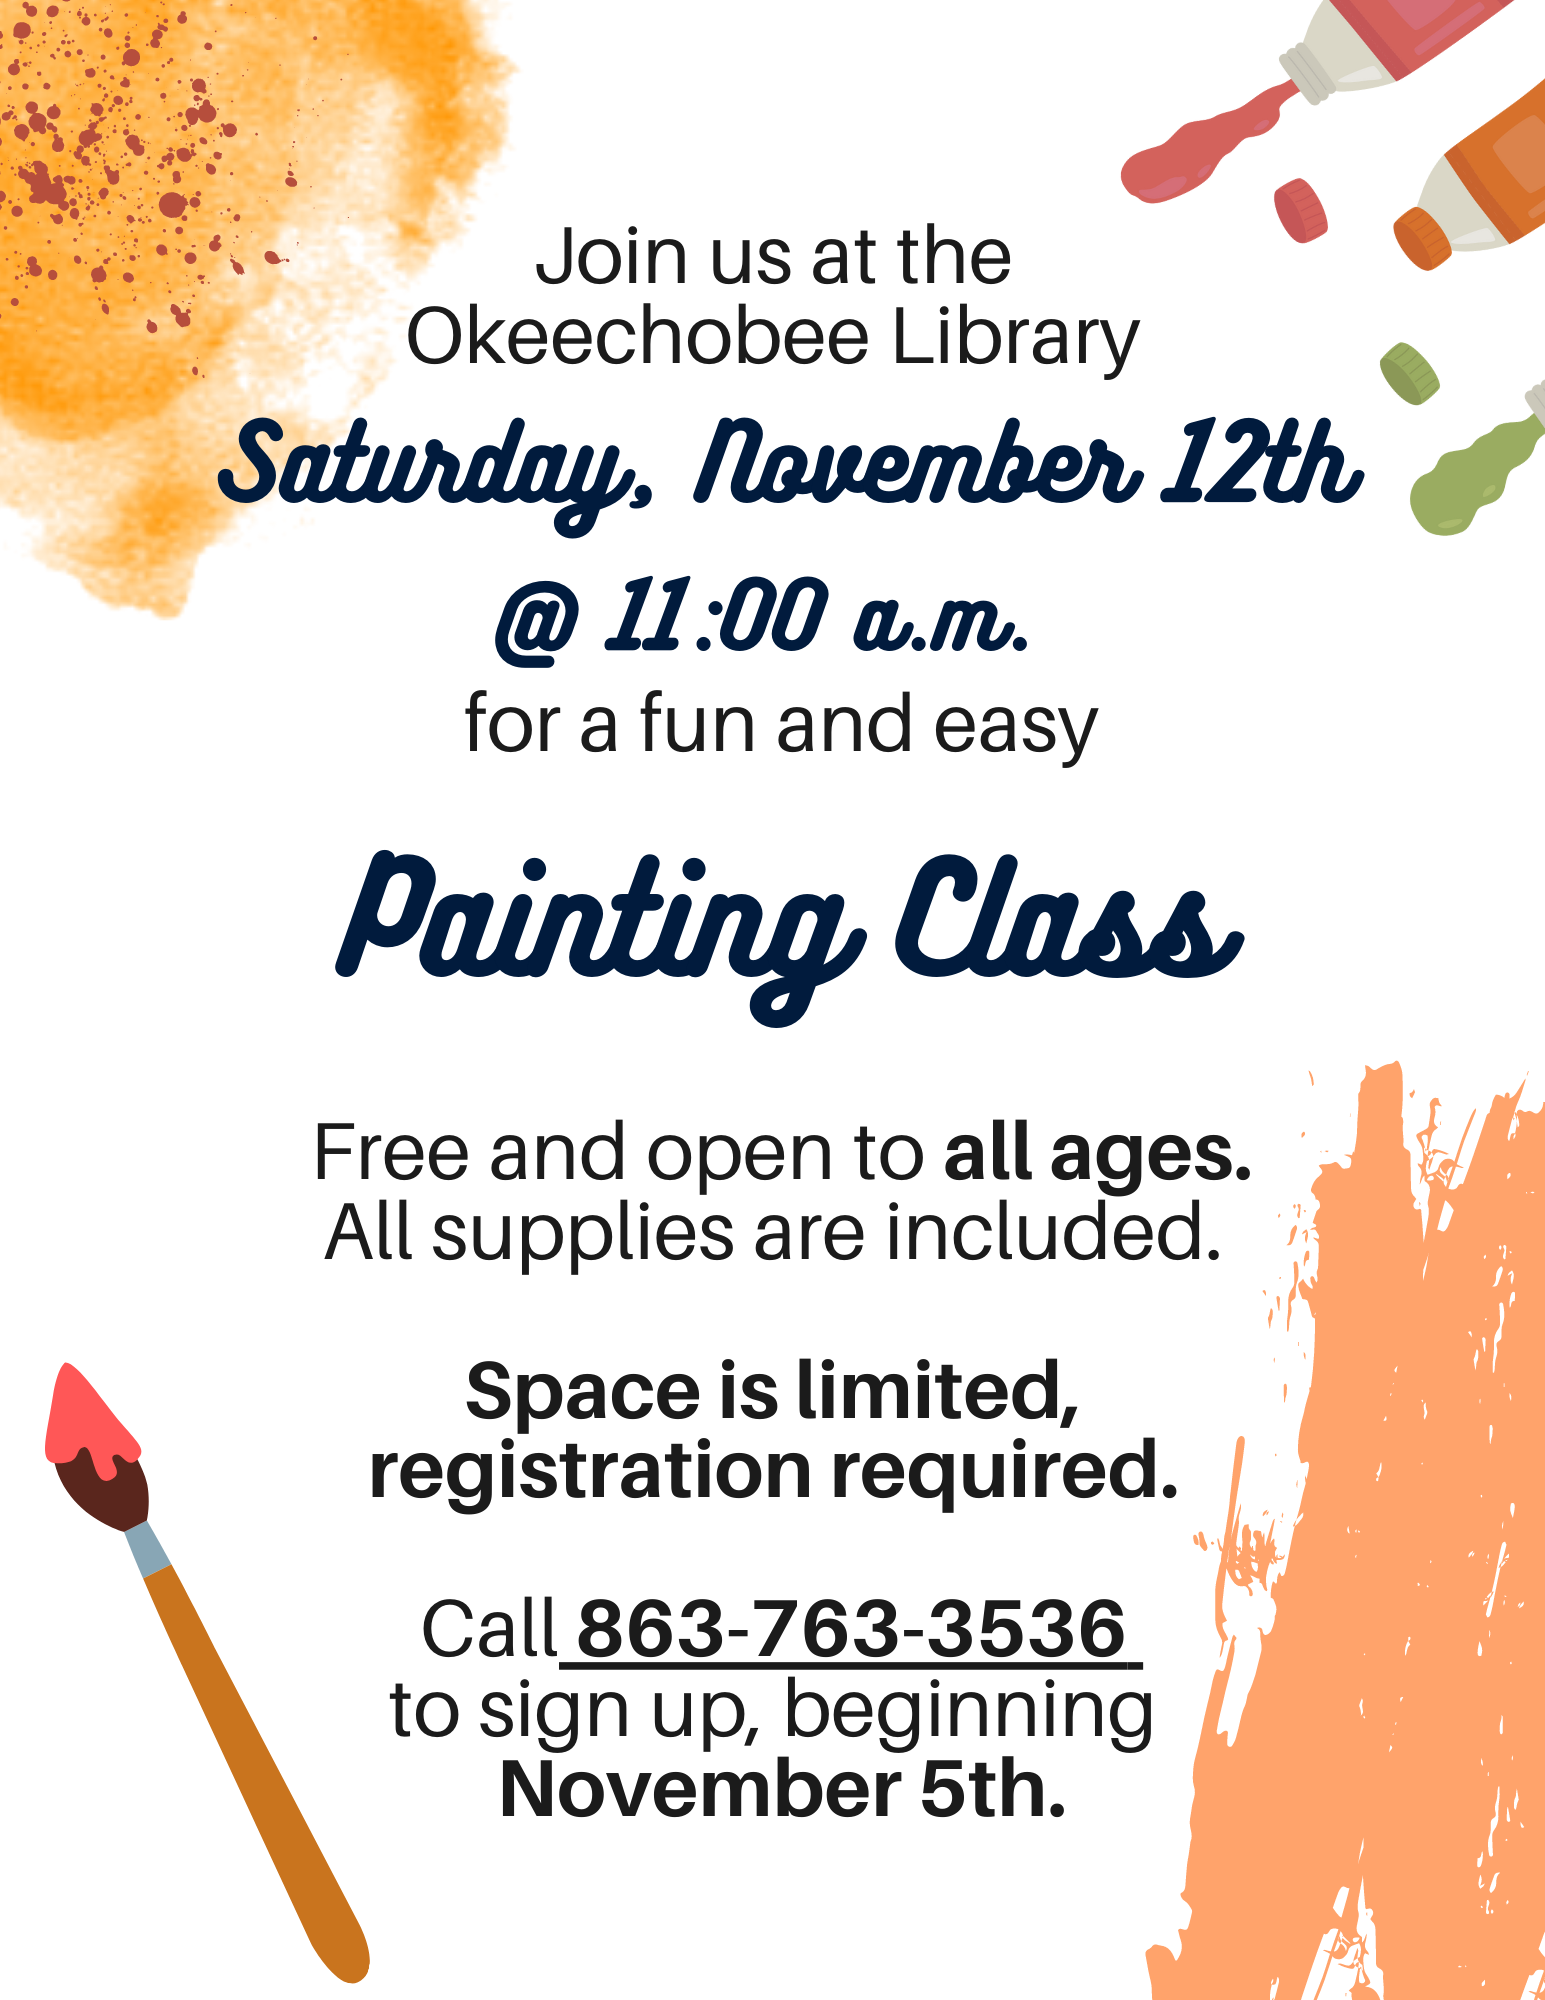 "Join us Saturday, November 12th at 11am for FREE! This event is open to all ages and all supplies are included."